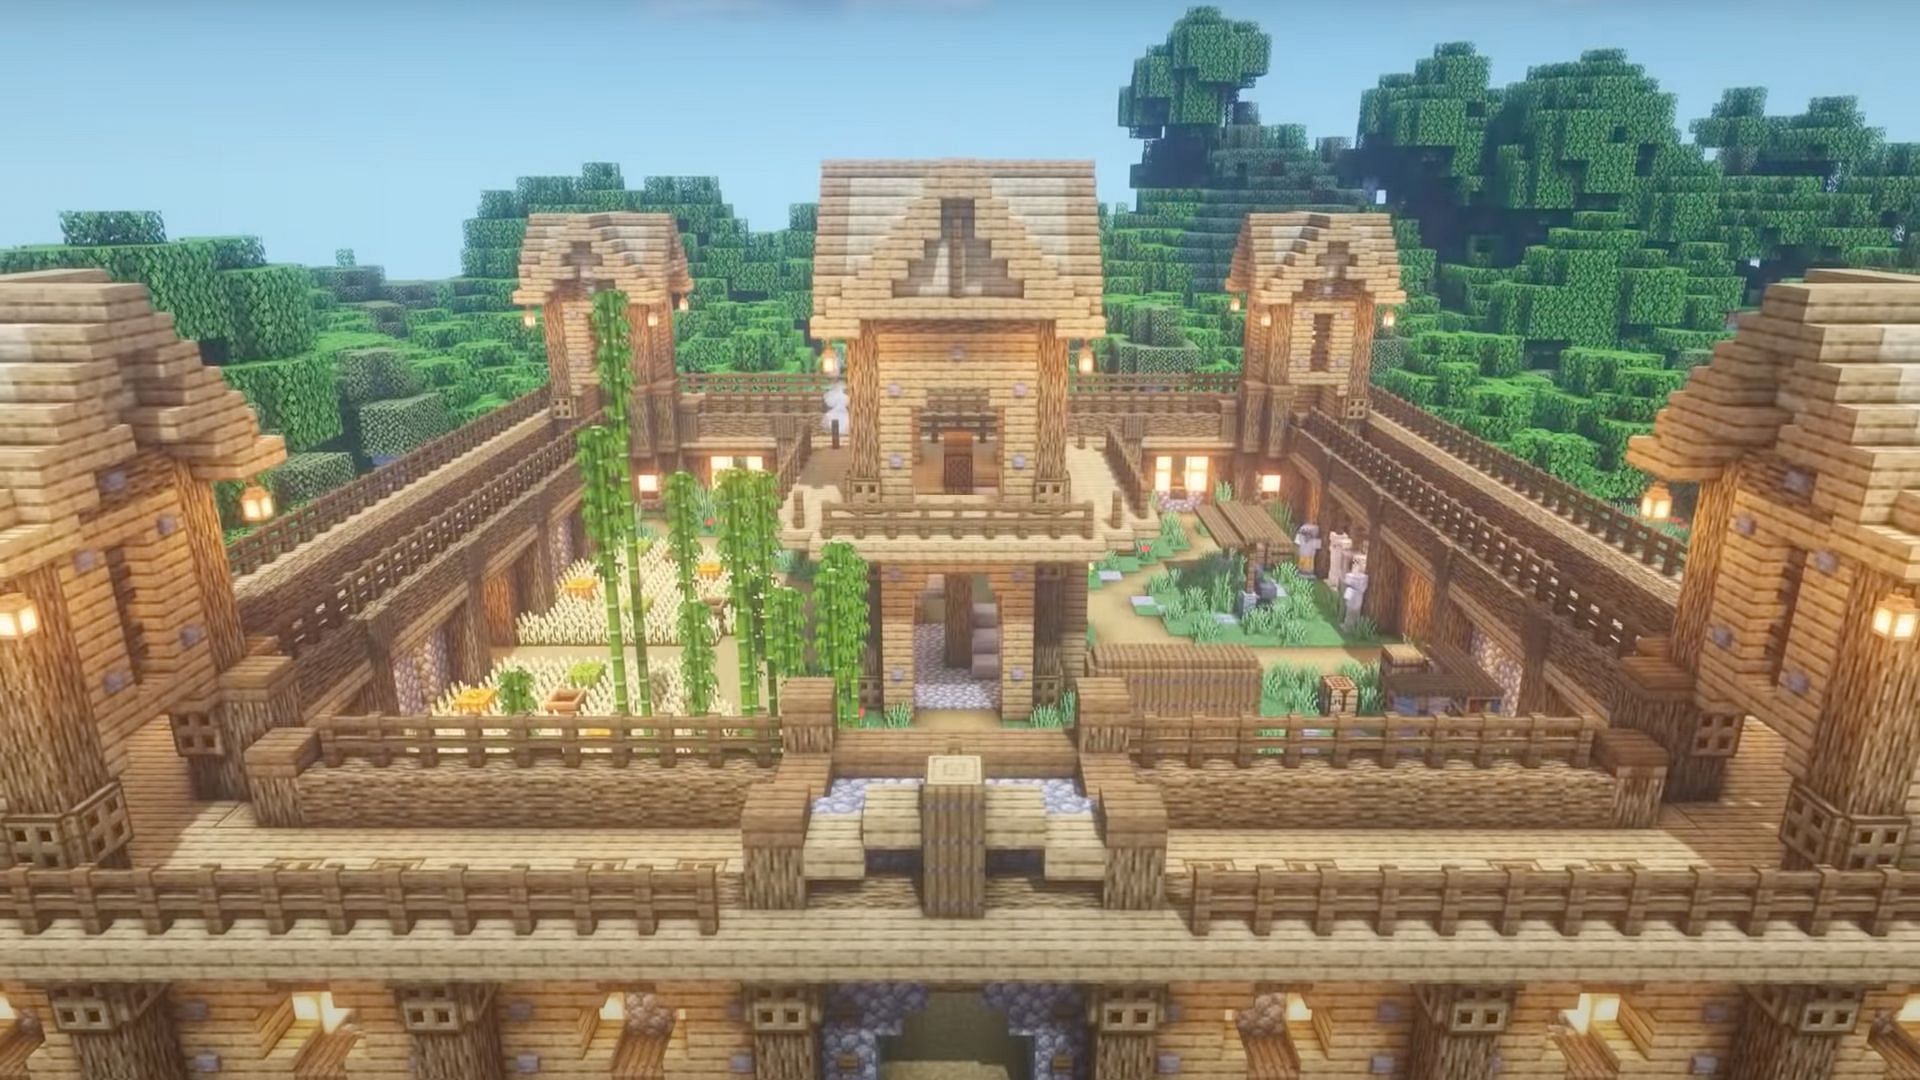 10 Best Minecraft Houses Ever Built In Survival Mode